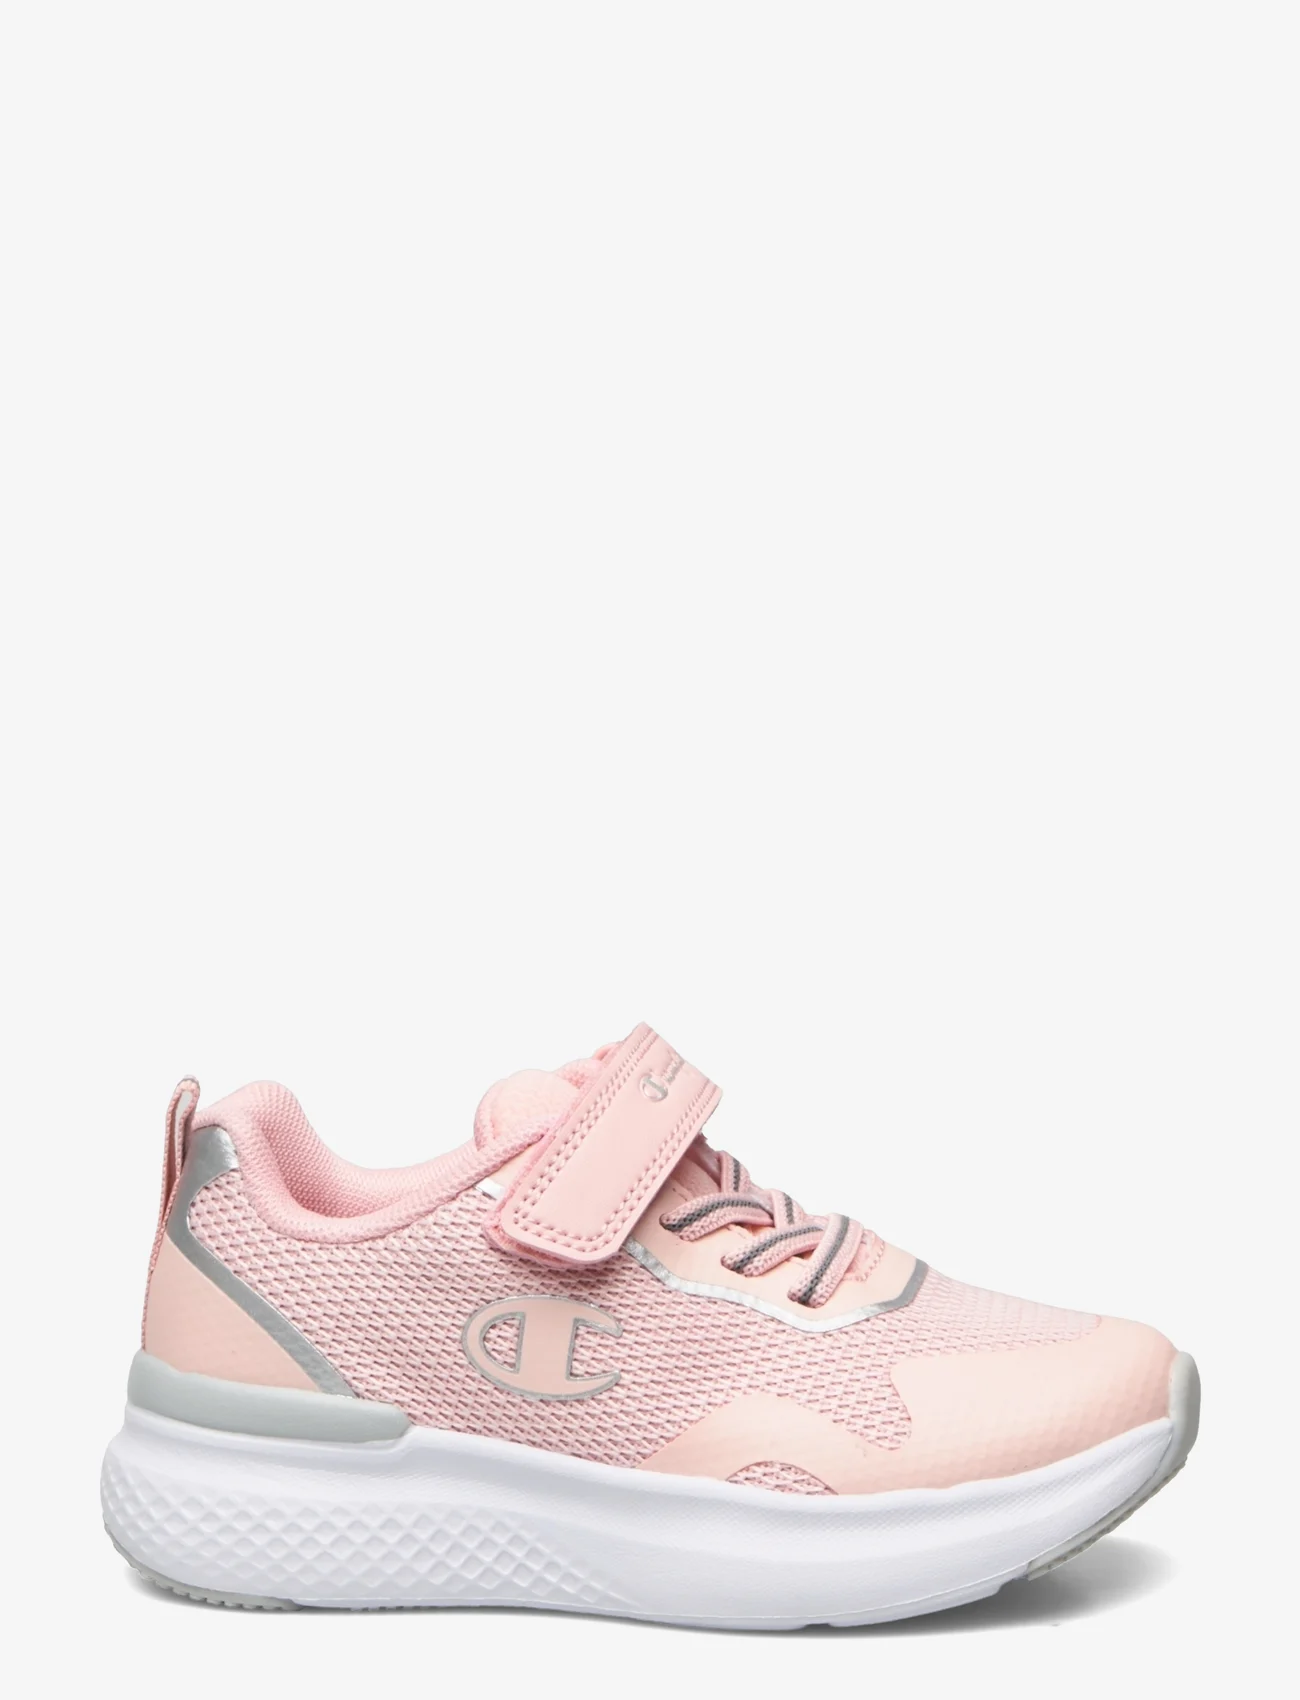 Champion - BOLD 3 G PS Low Cut Shoe - low-top sneakers - rose dust - 1